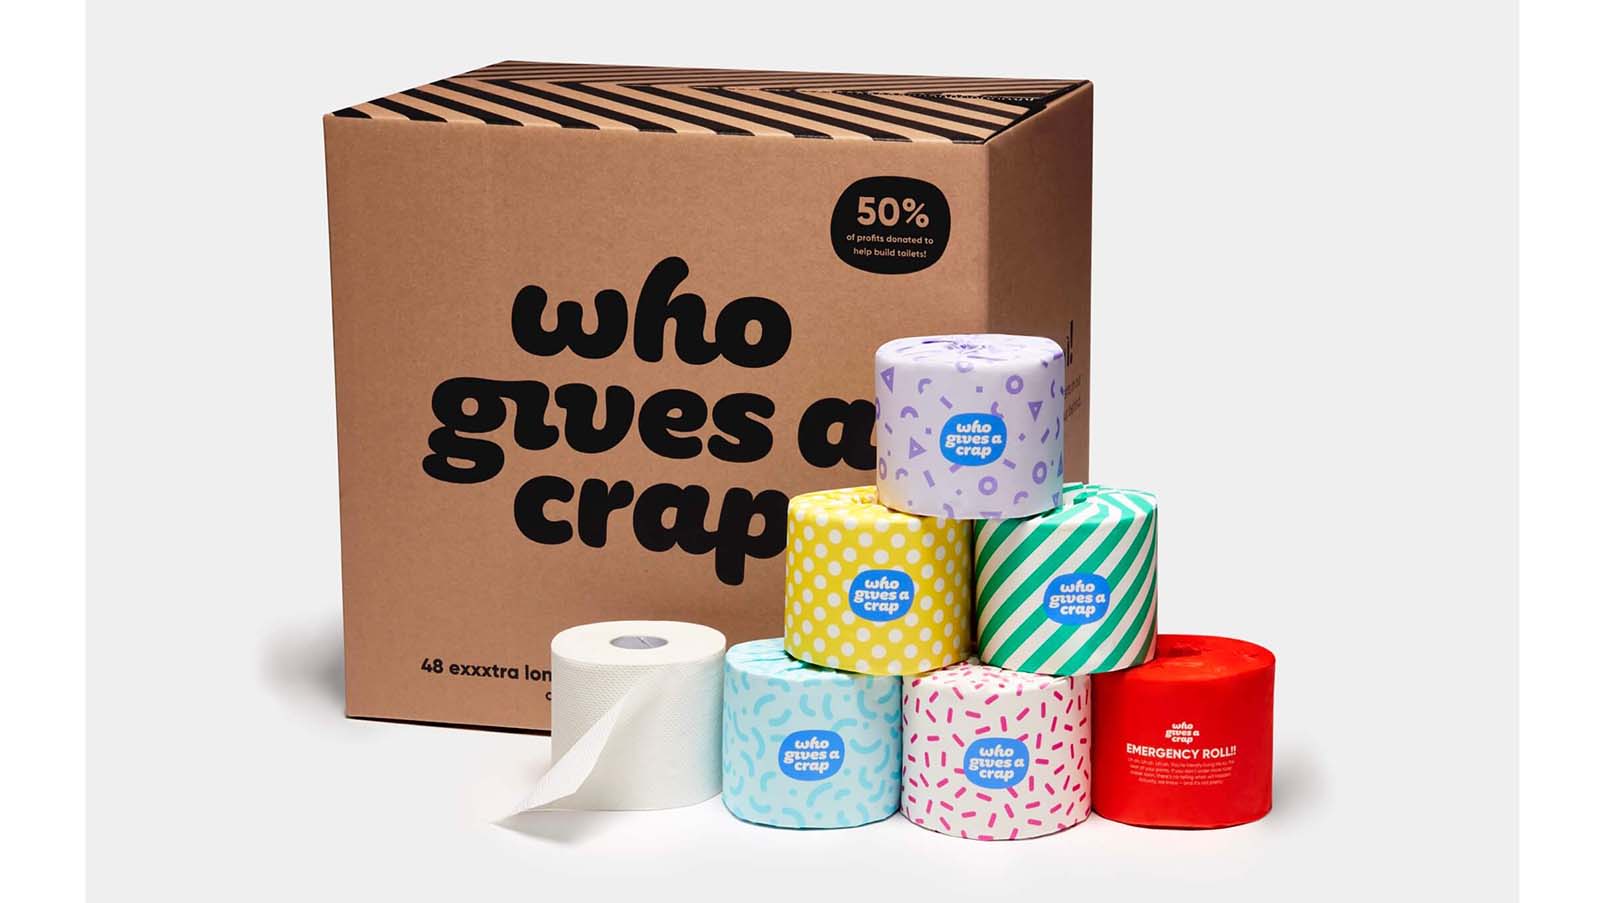 100% Recycled Toilet Paper - 48 Rolls for $62 - Best Value!